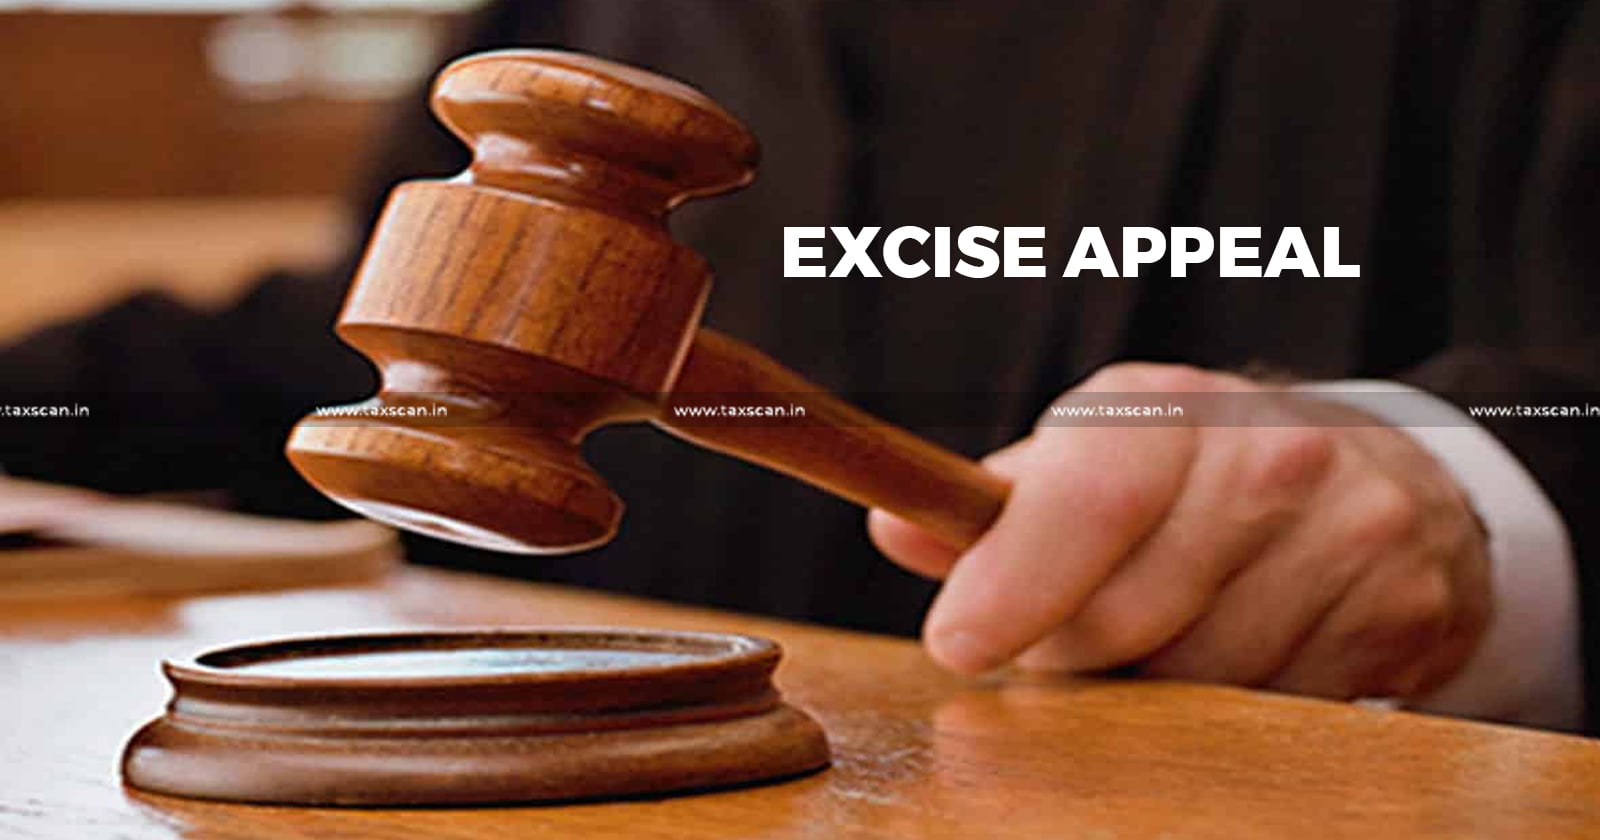 Excise Appeal - Excise - Appeal - CESTAT - Customs - taxscan